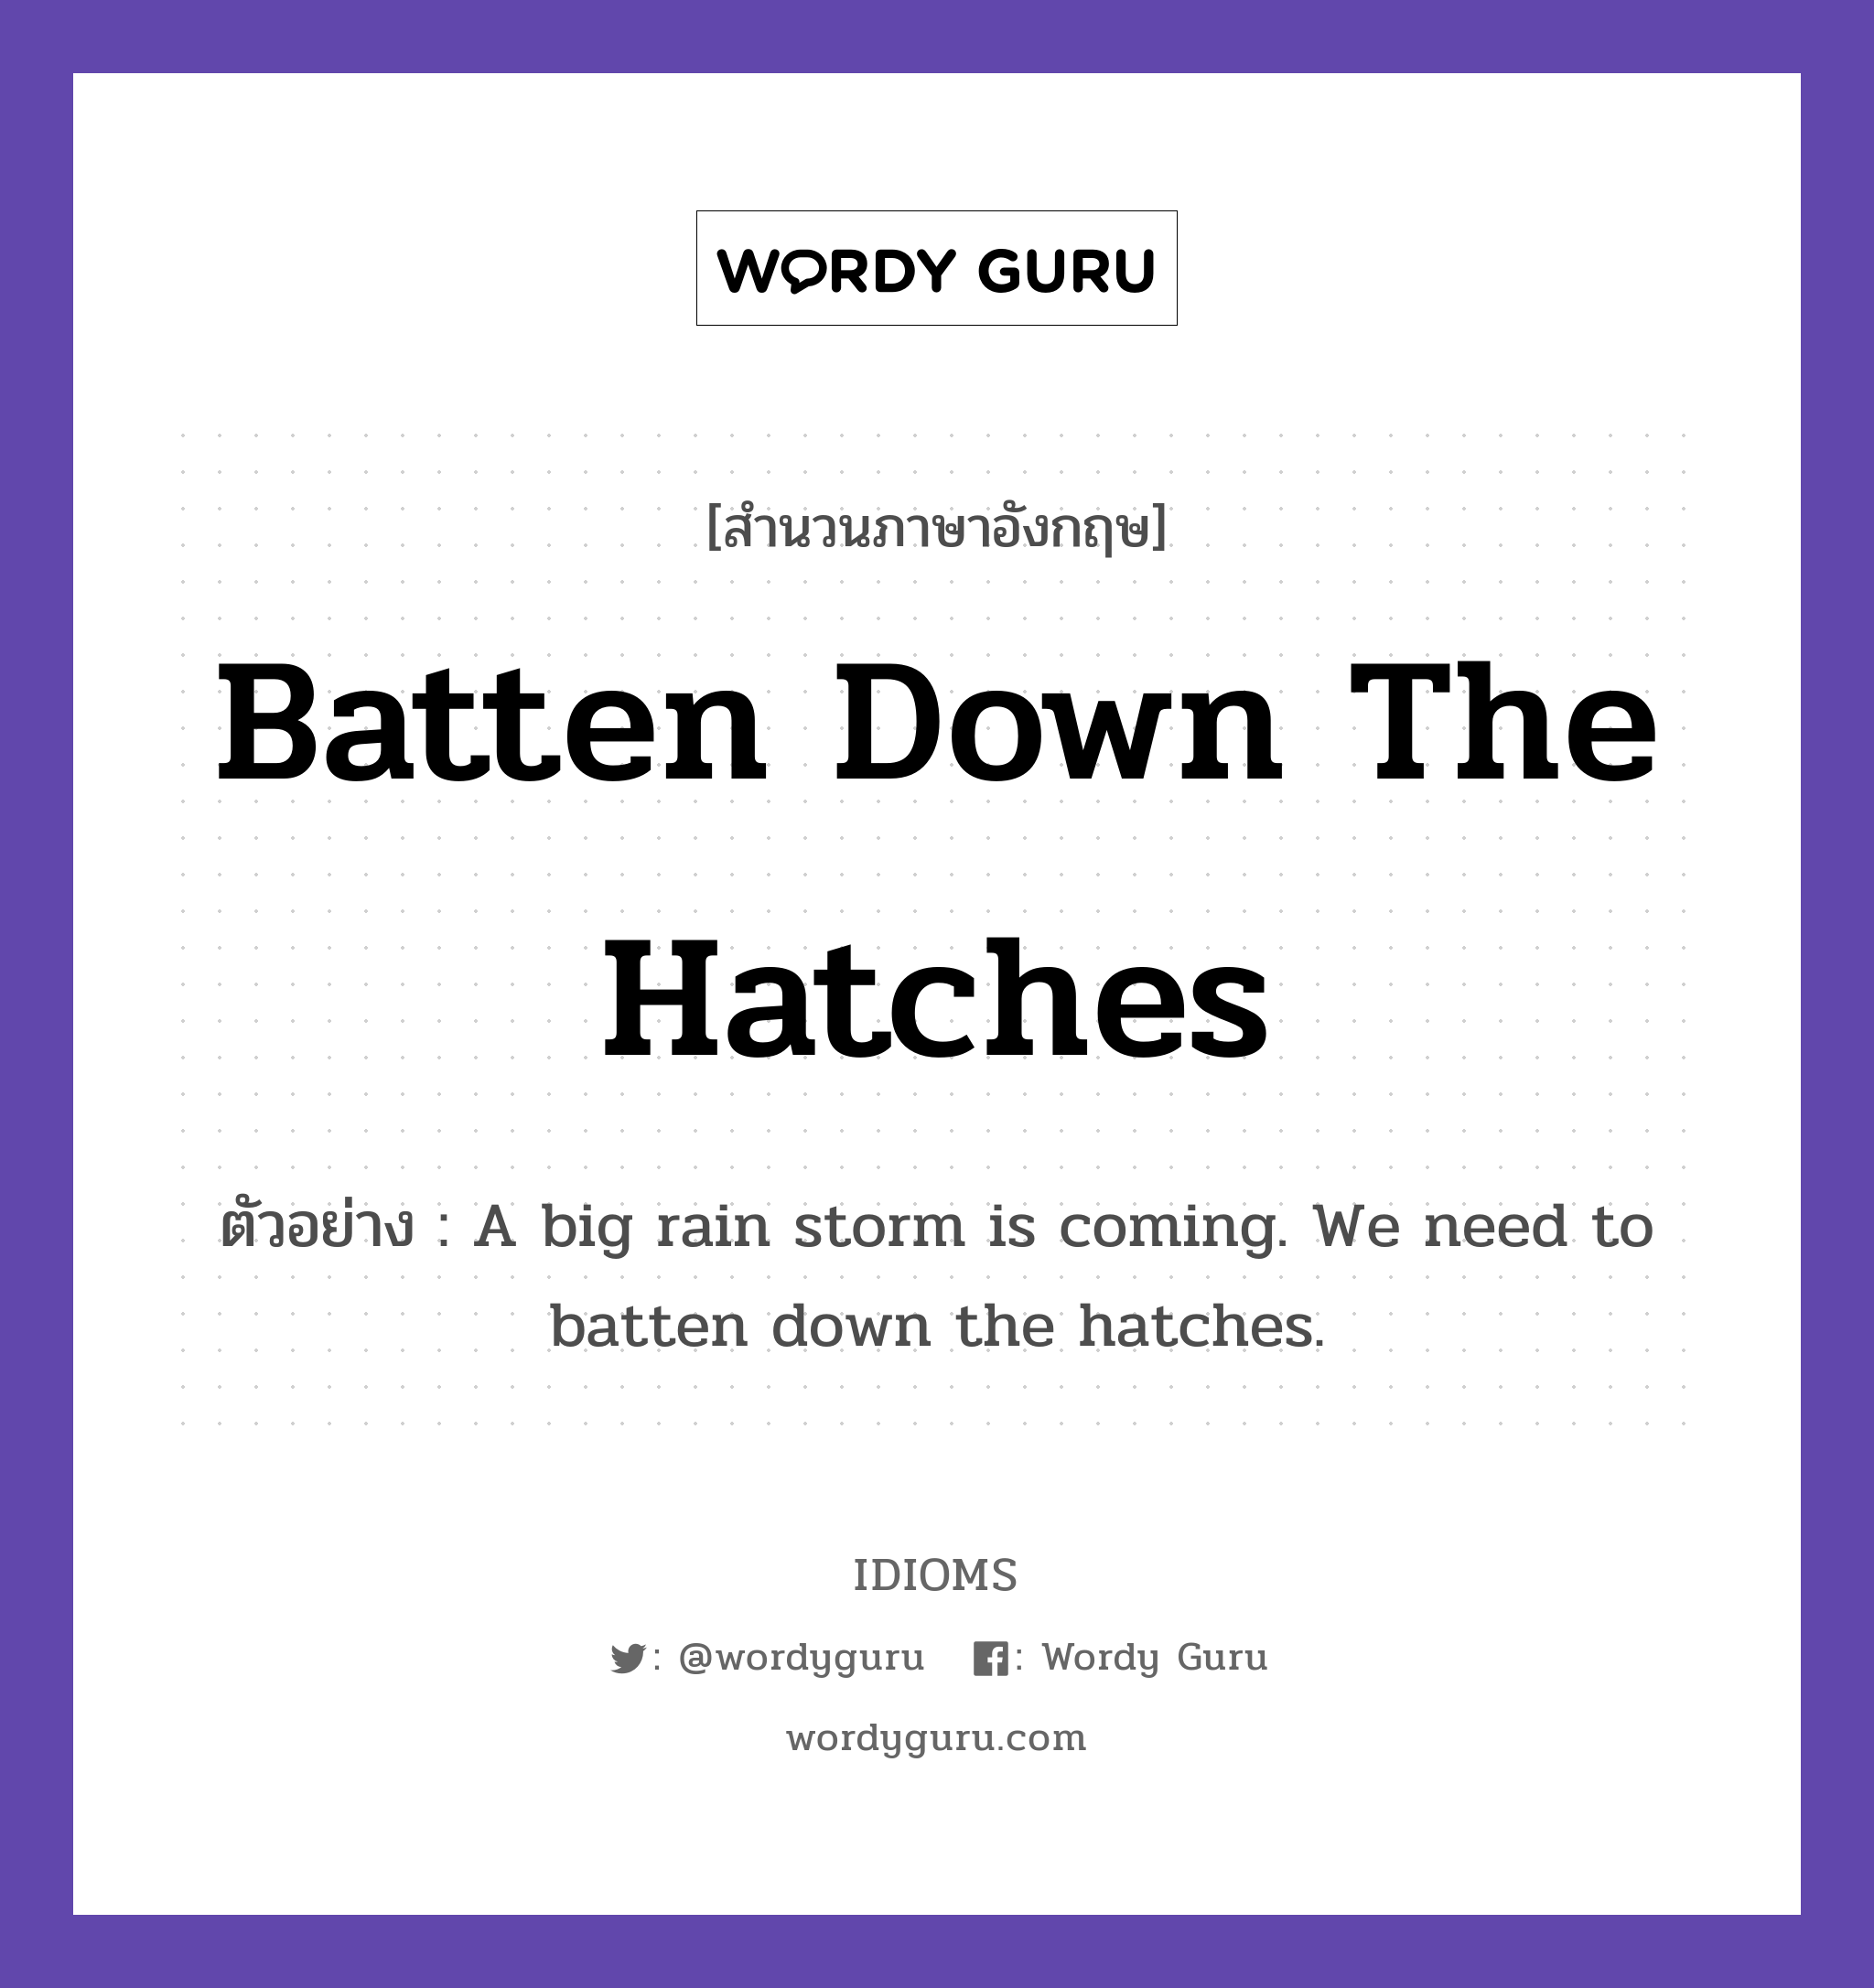 Batten Down The Hatches แปลว่า?, สำนวนภาษาอังกฤษ Batten Down The Hatches ตัวอย่าง A big rain storm is coming. We need to batten down the hatches.